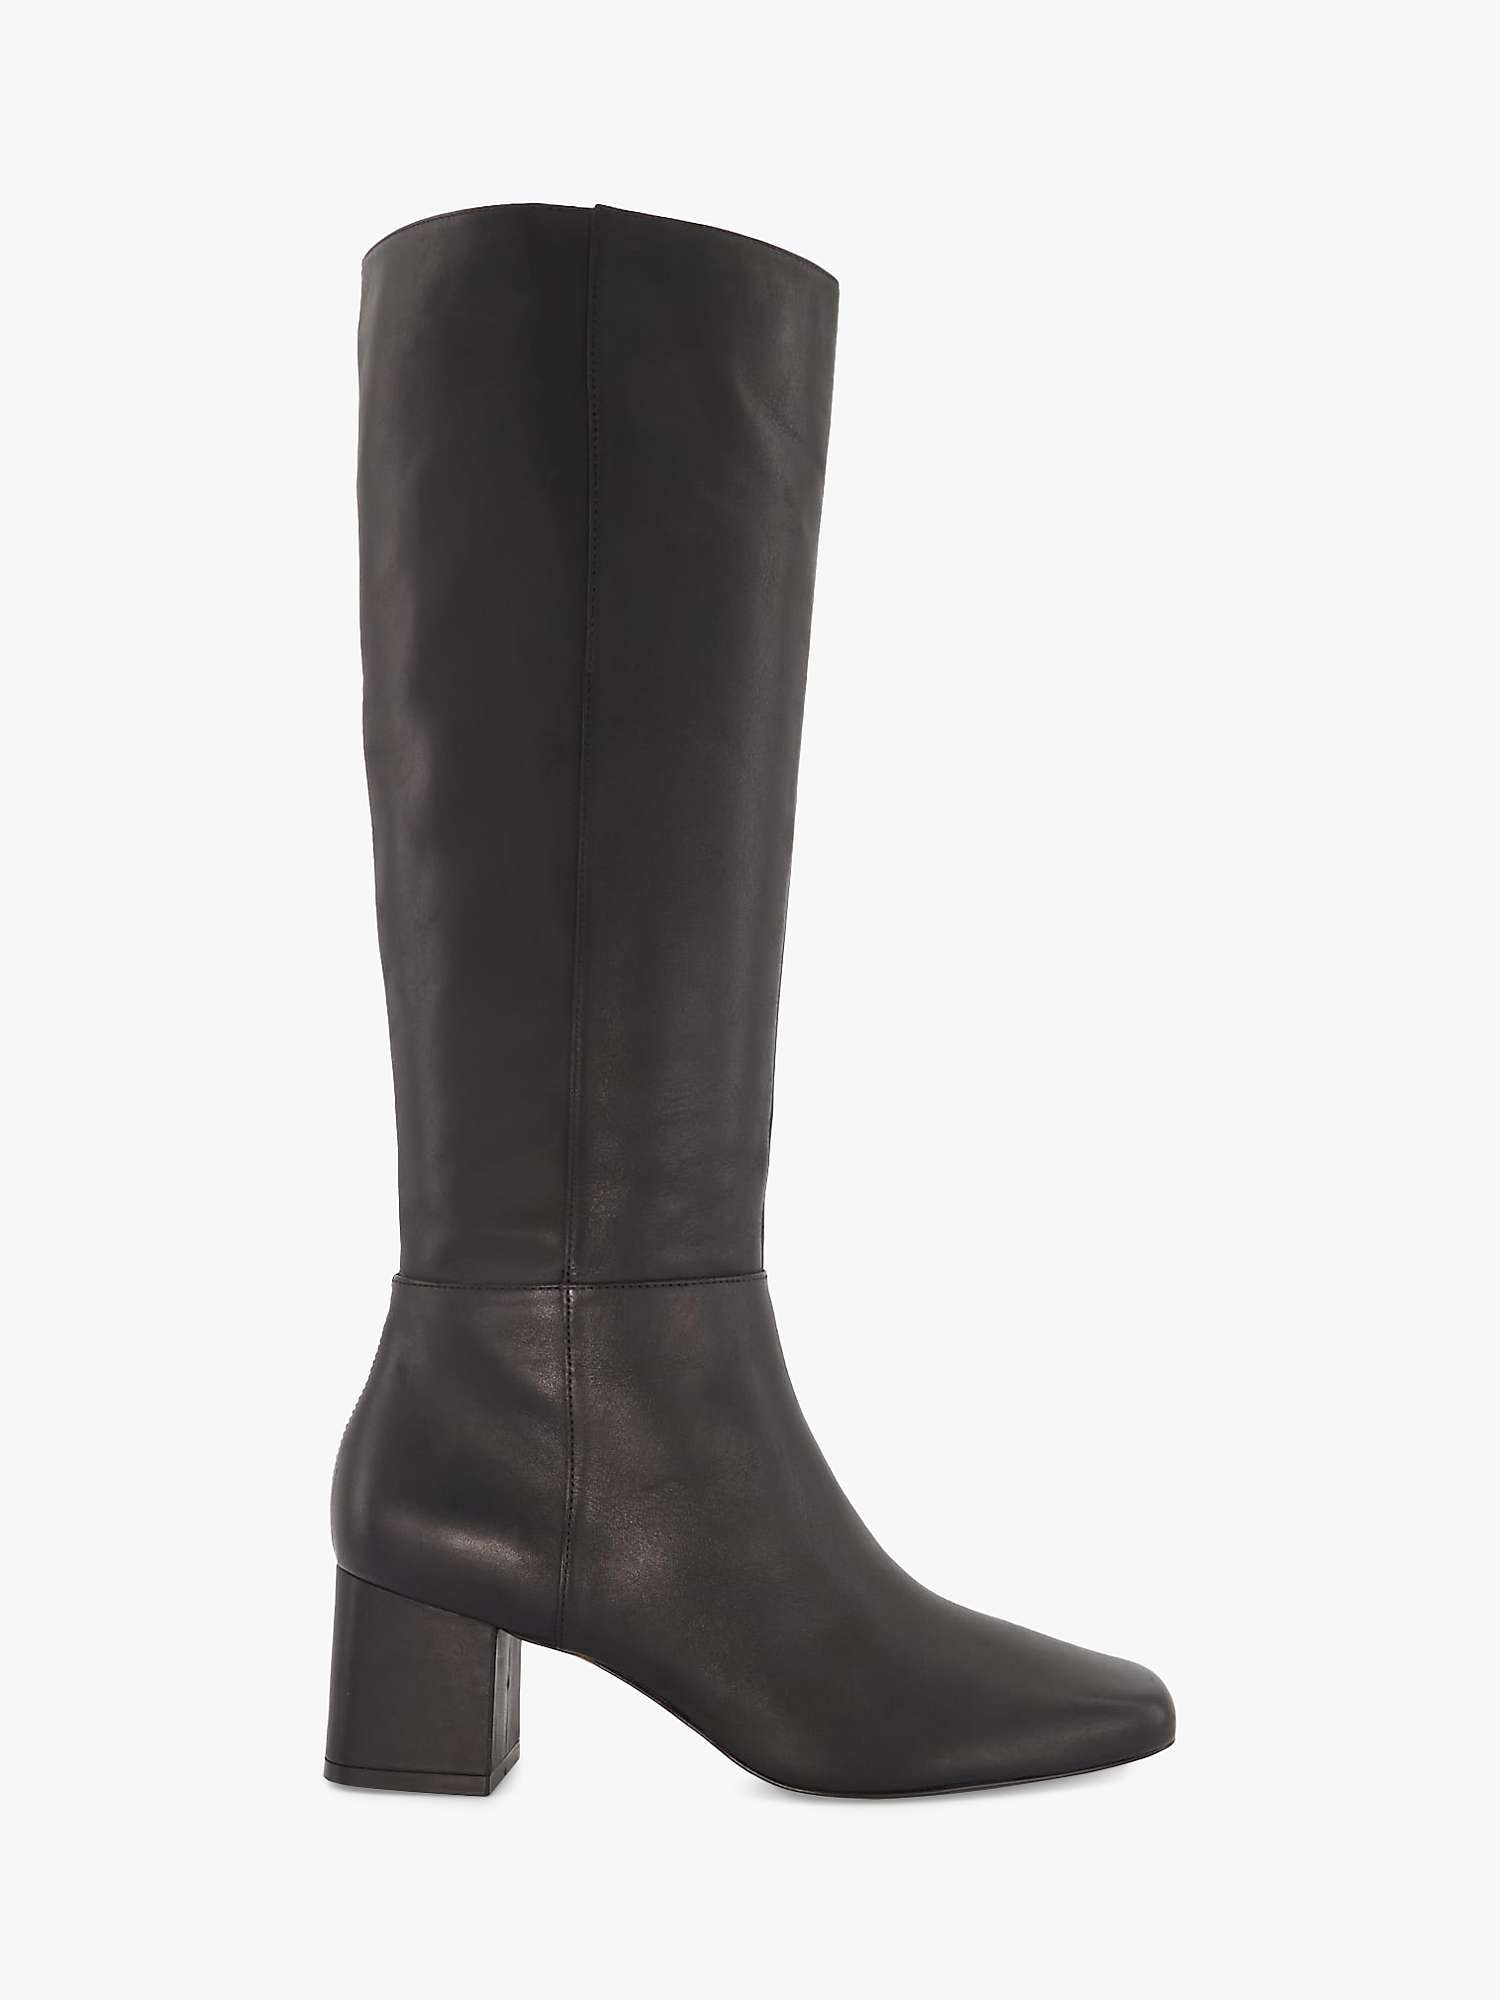 Buy Dune Signature Leather Knee High Boots, Black Online at johnlewis.com